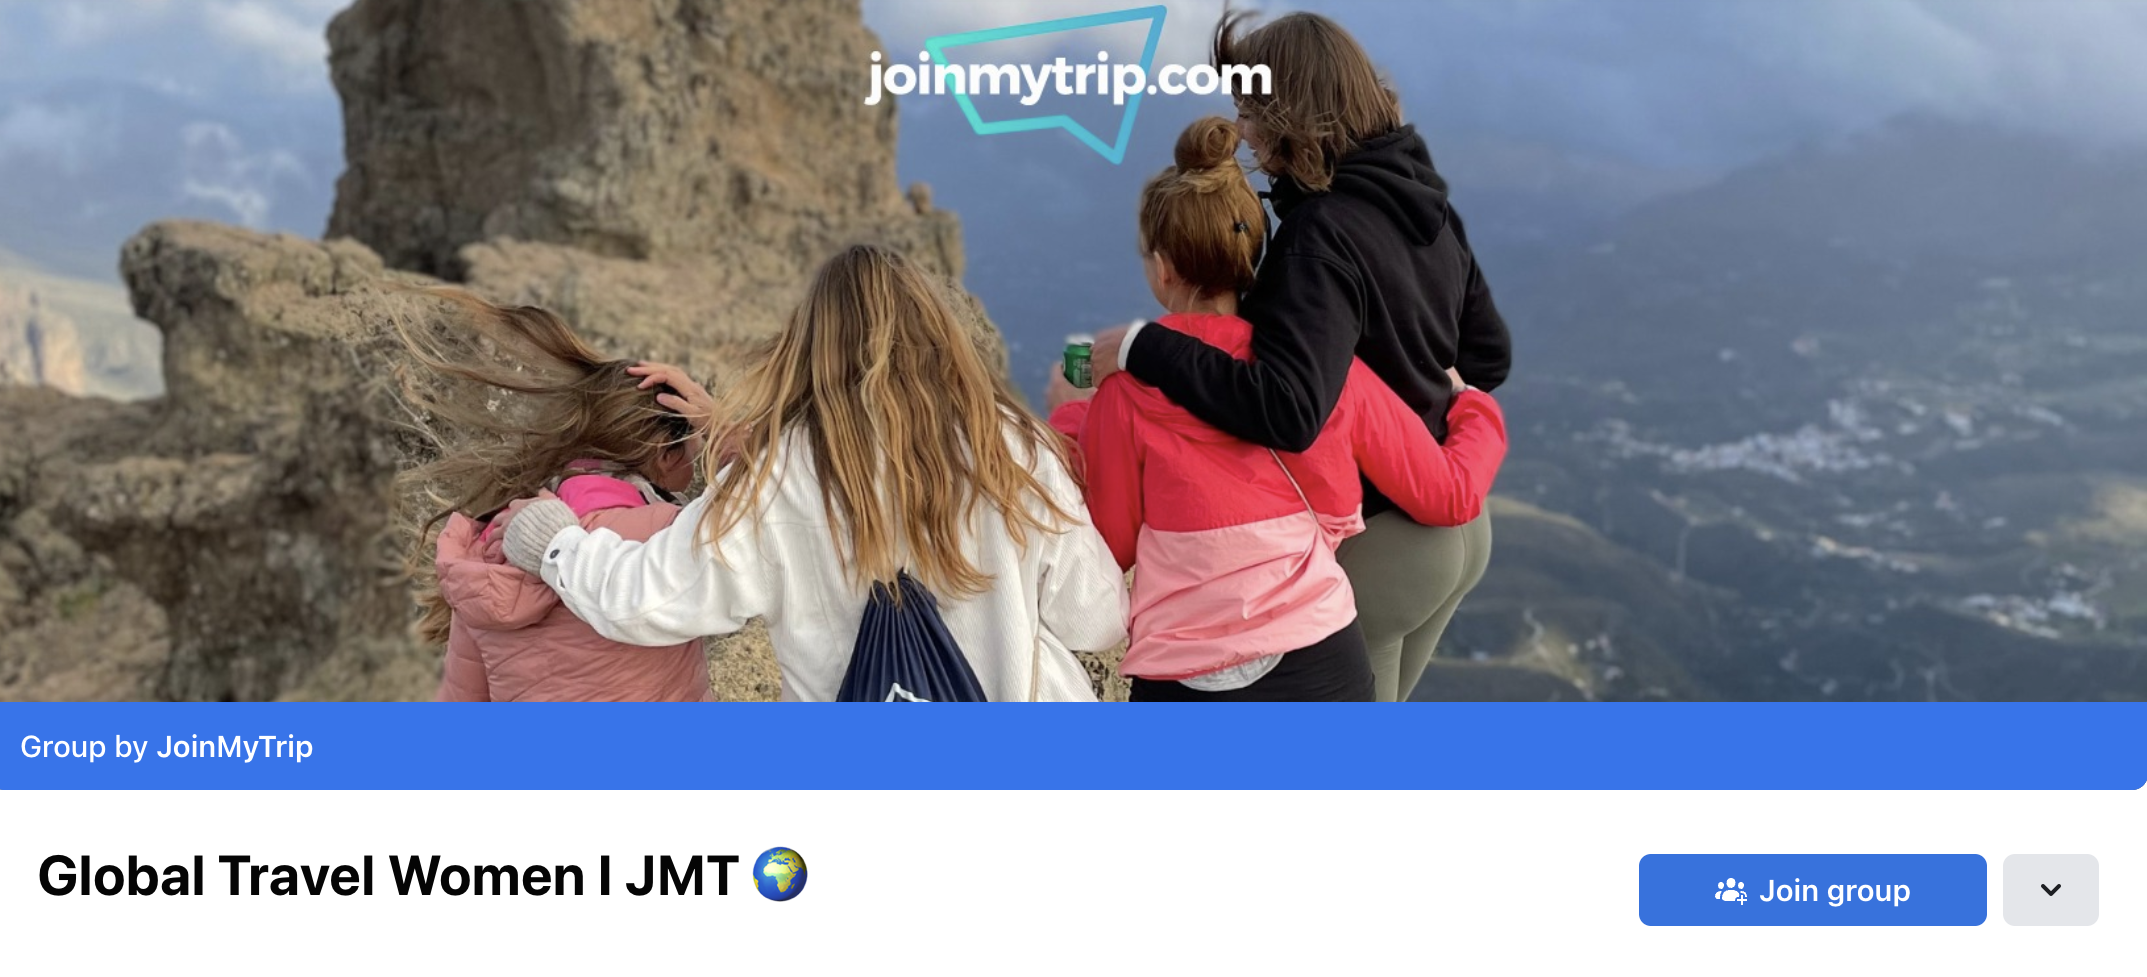 women travel groups joinmytrip